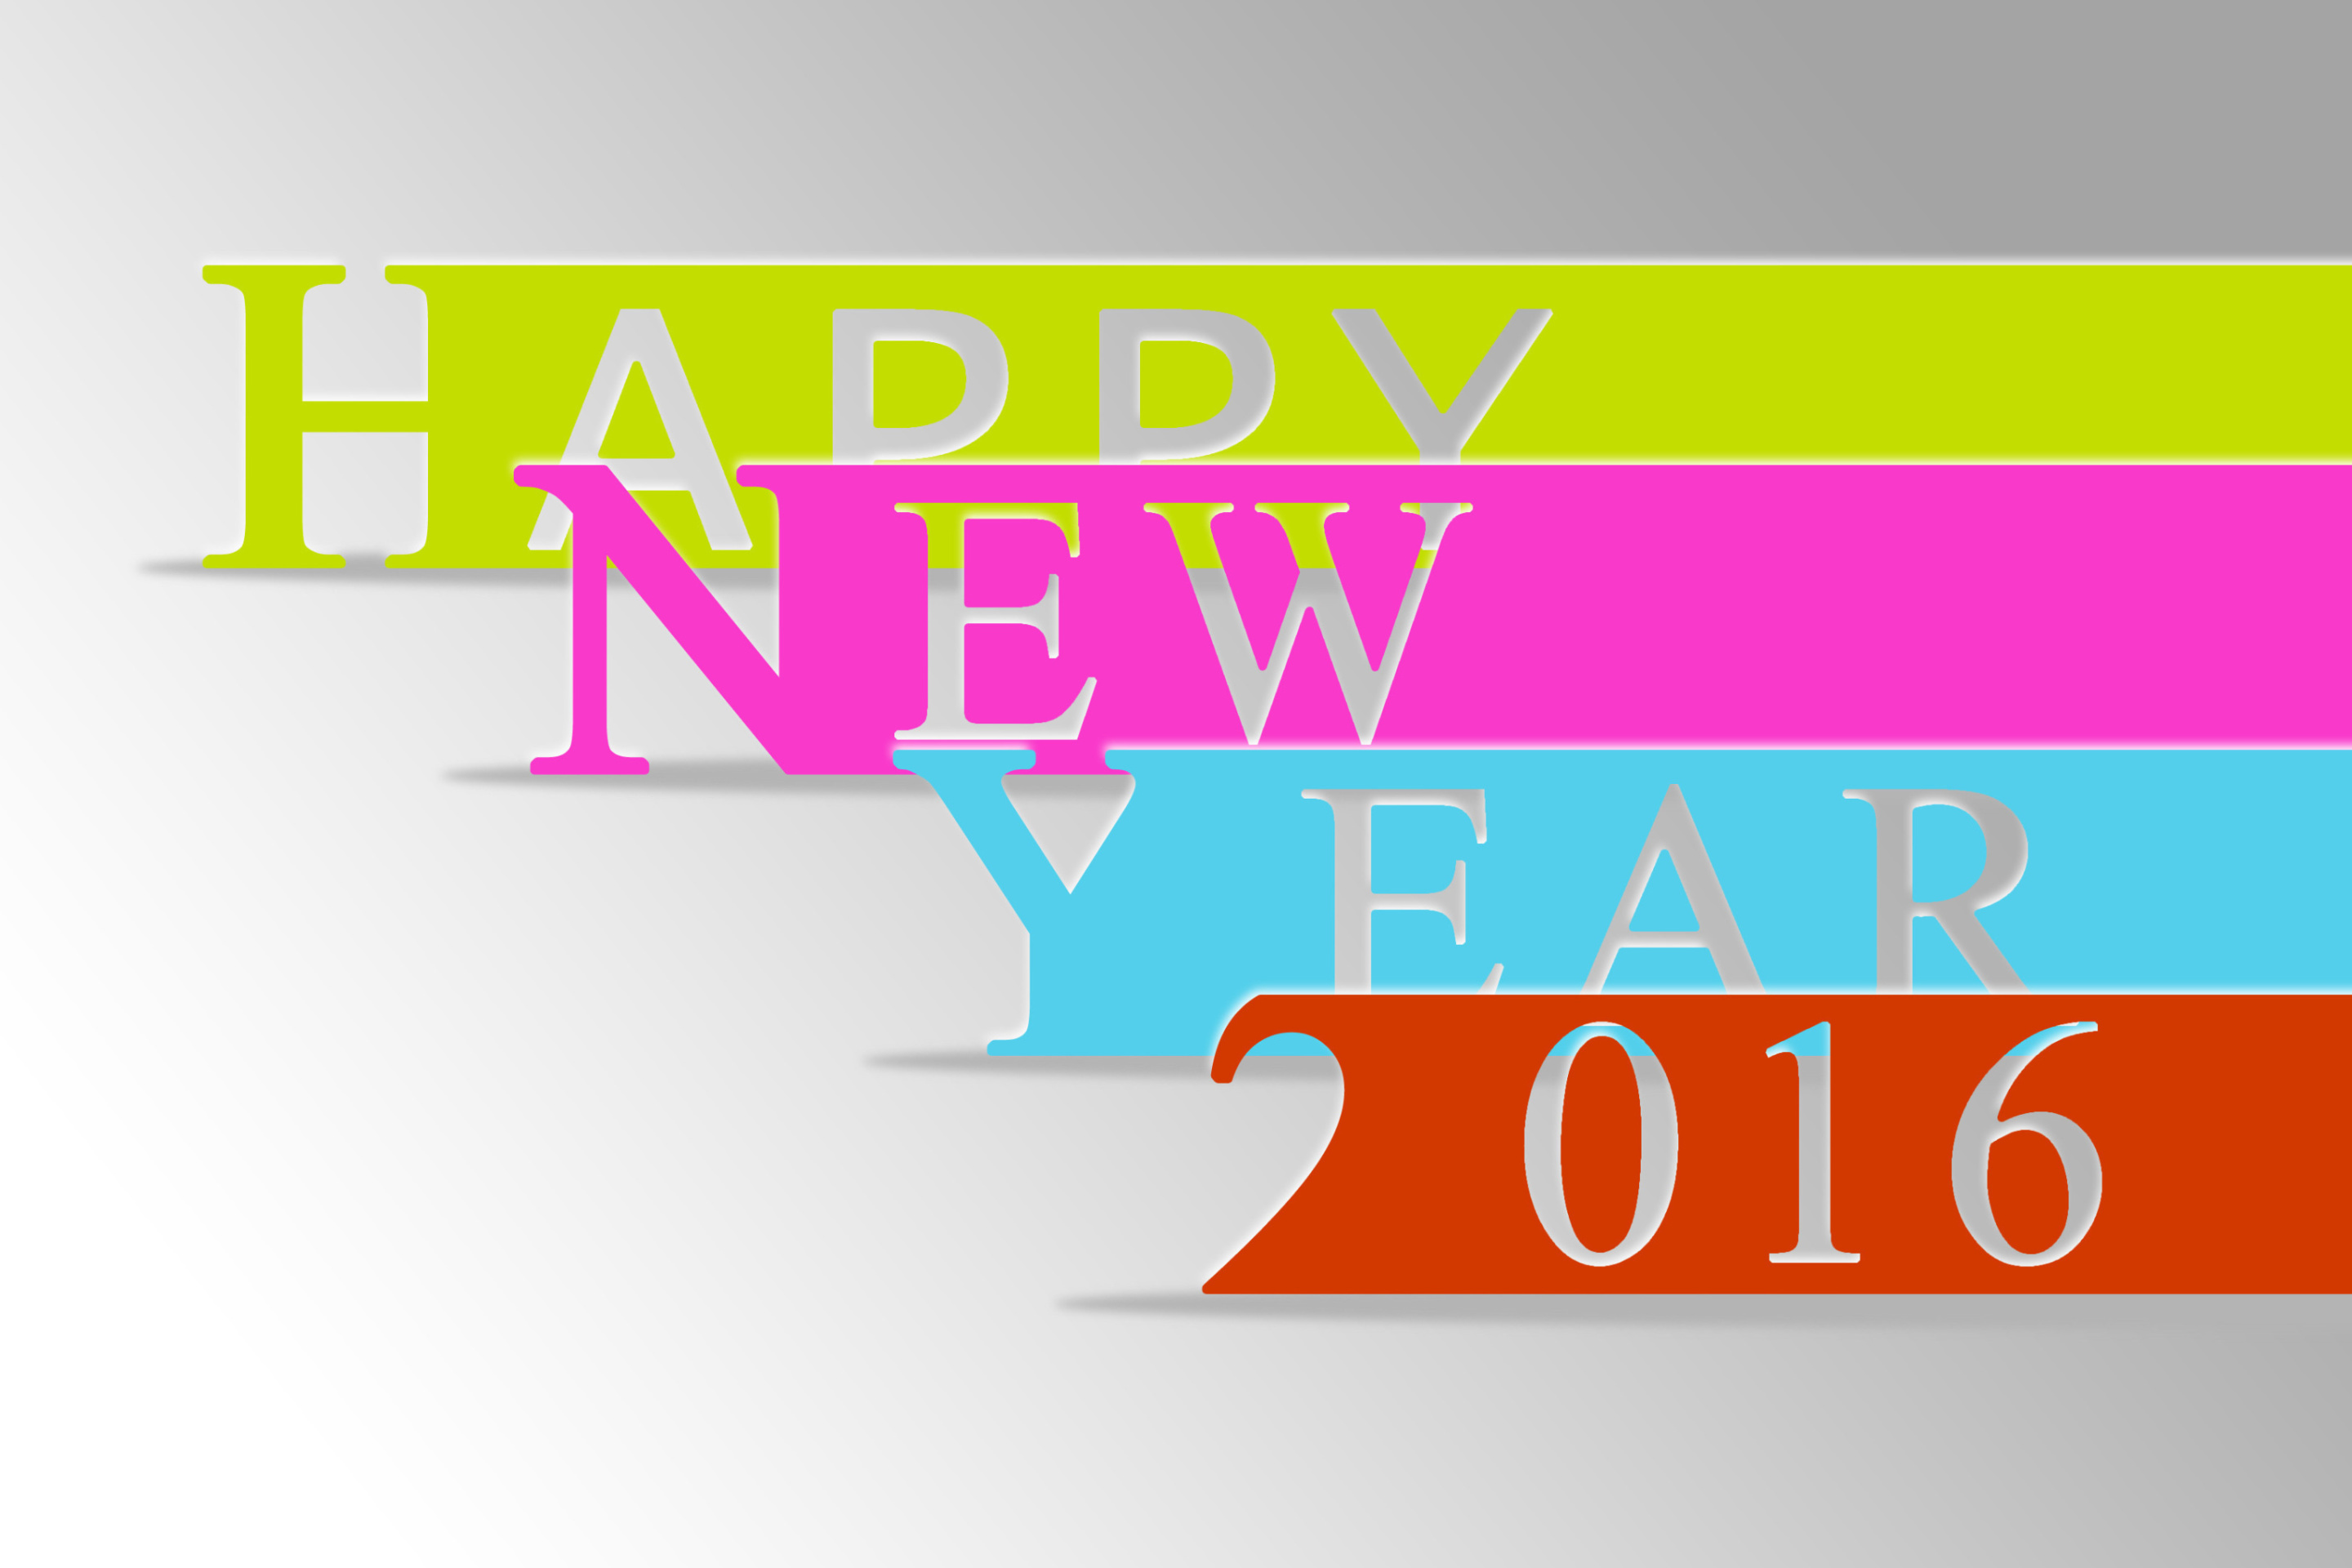 Das Happy New Year 2016 Colorful Wallpaper 2880x1920